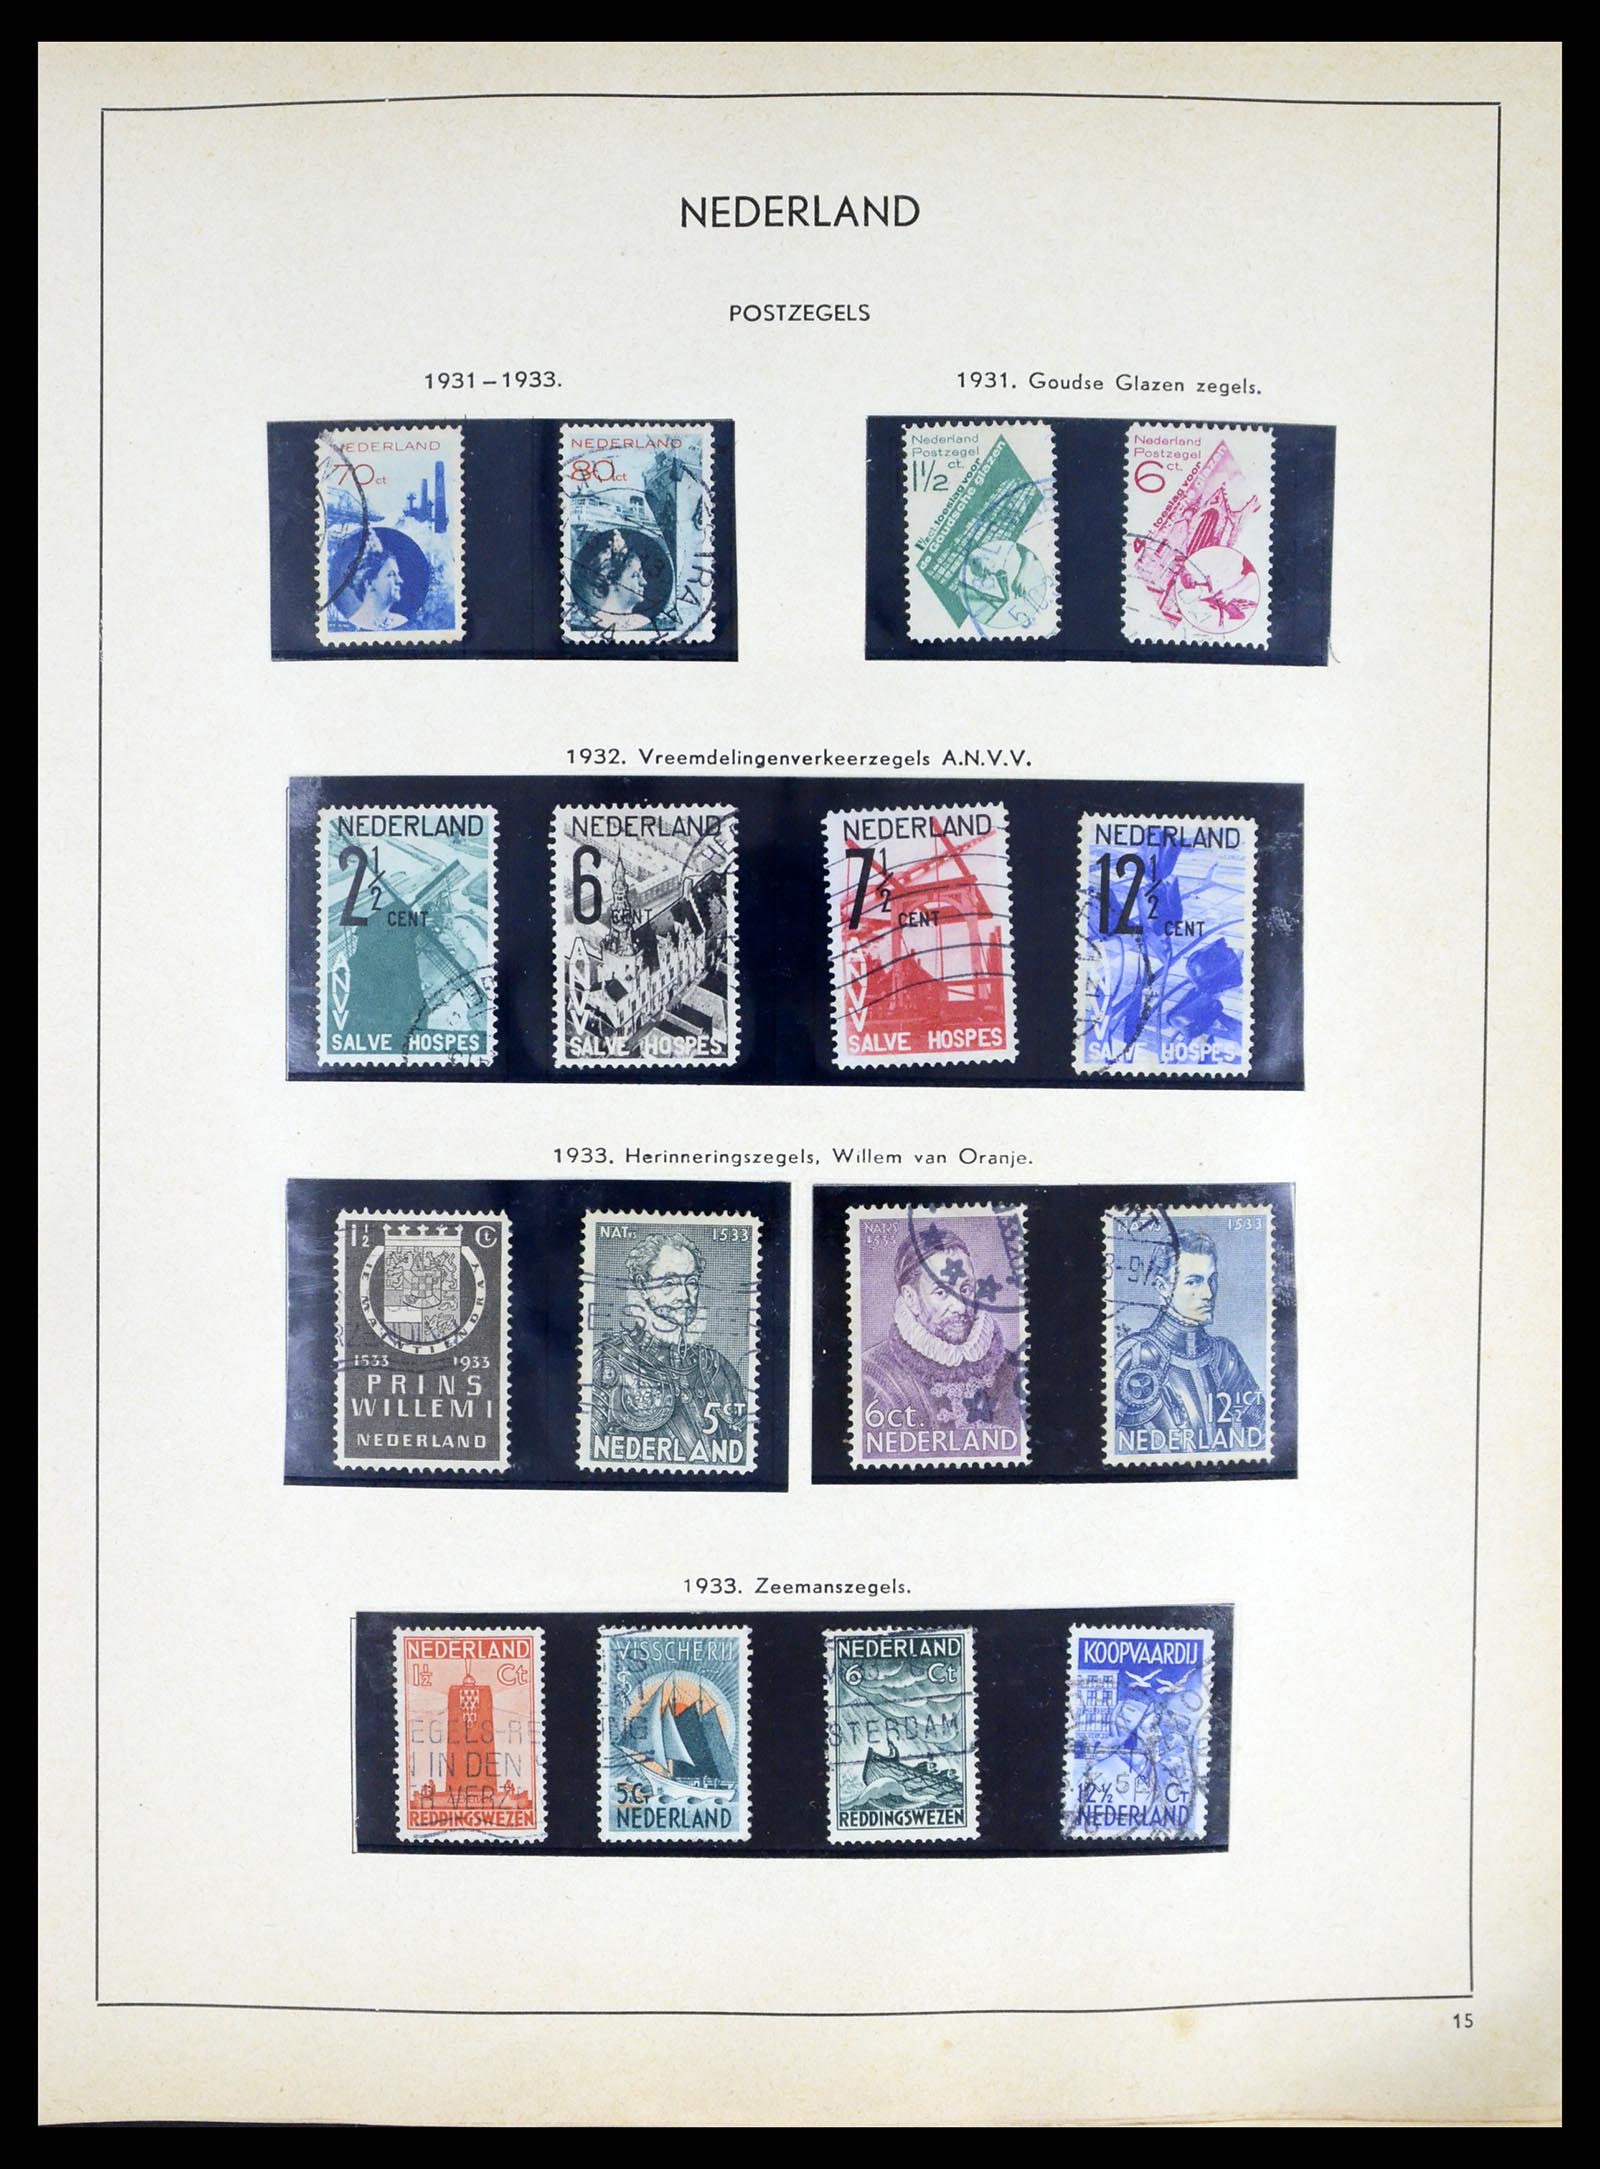 37618 011 - Stamp collection 37618 Netherlands and territories 1852-1972.